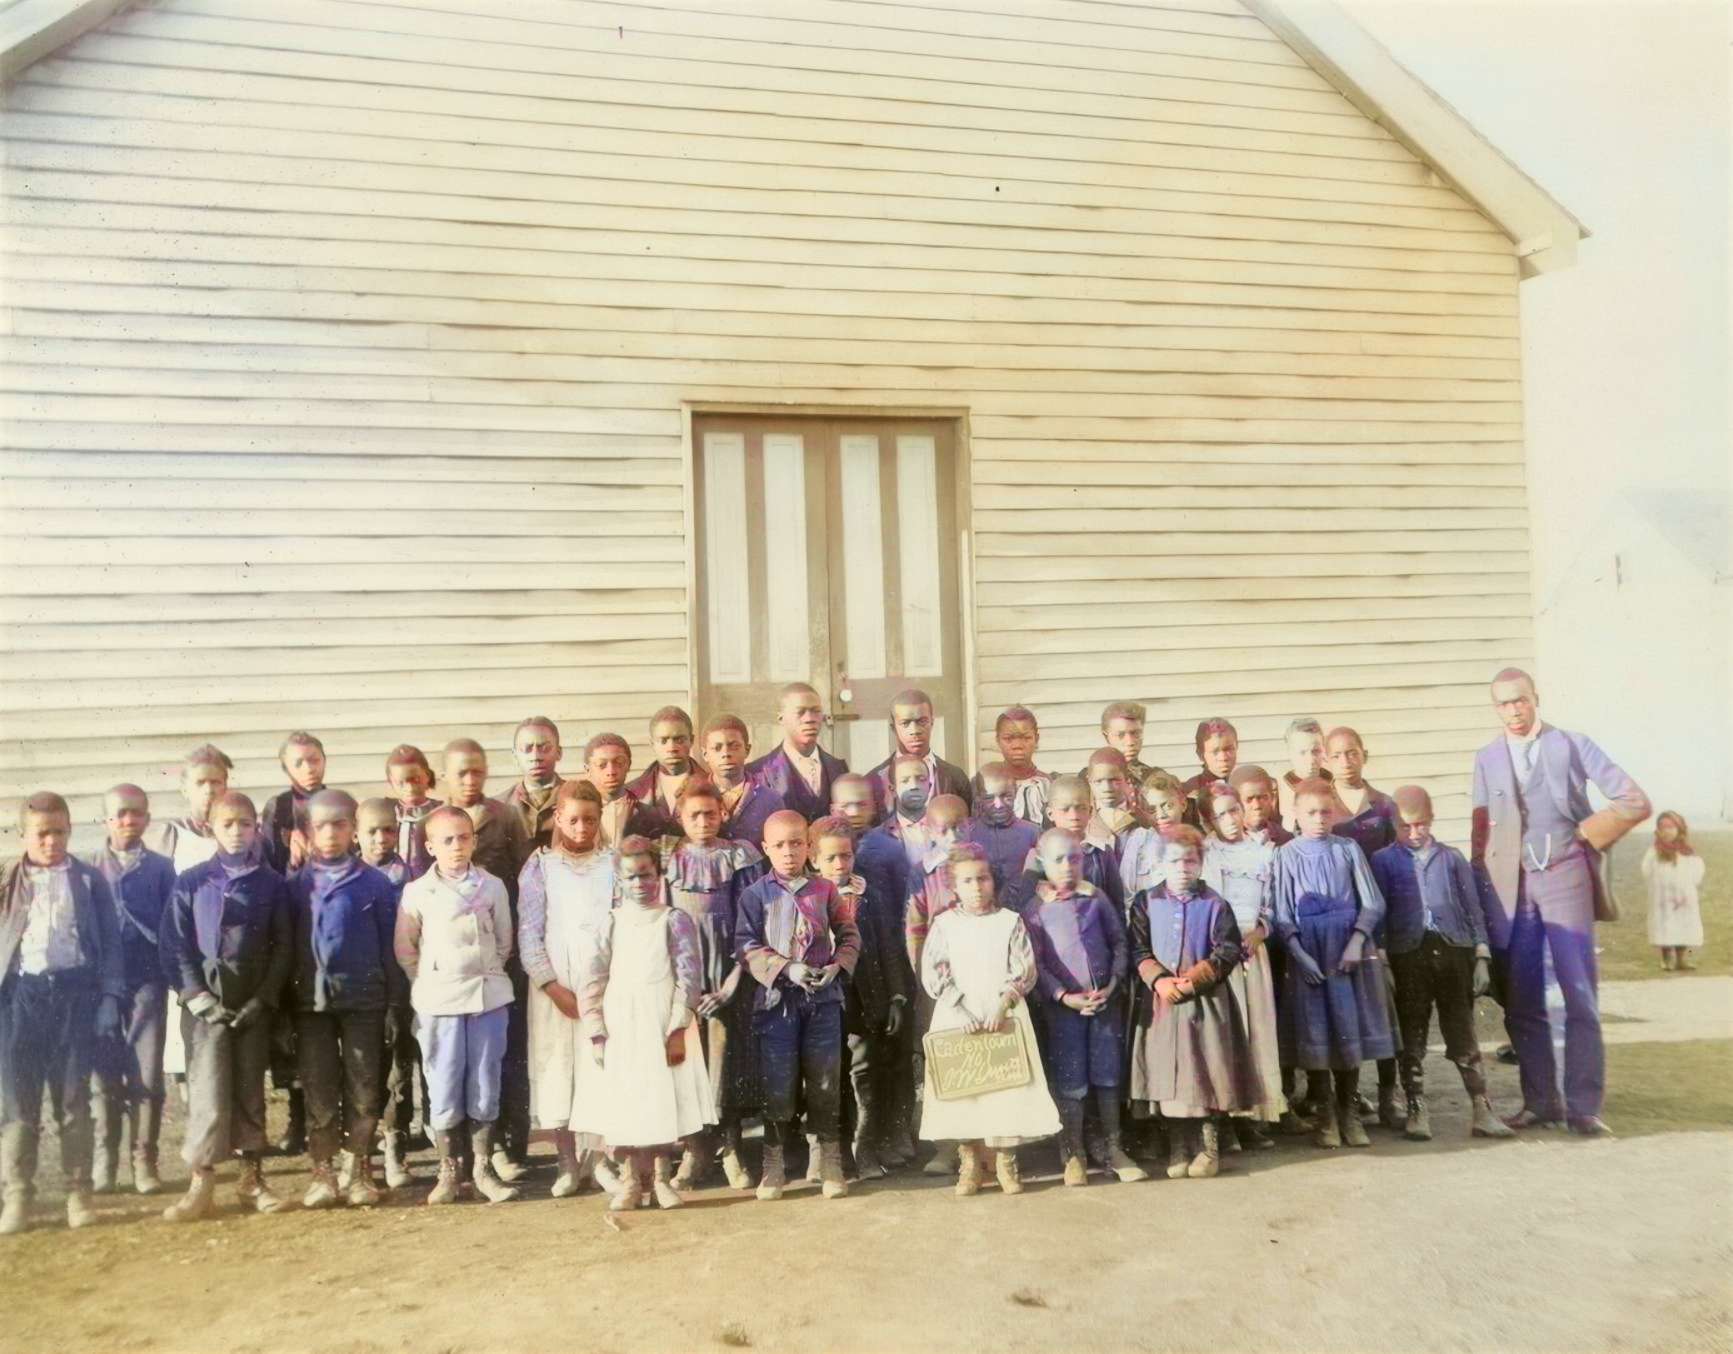 A One-Room Schoolhouse with a Powerful History: Effort Underway to Preserve Fayette County's Rosenwald School